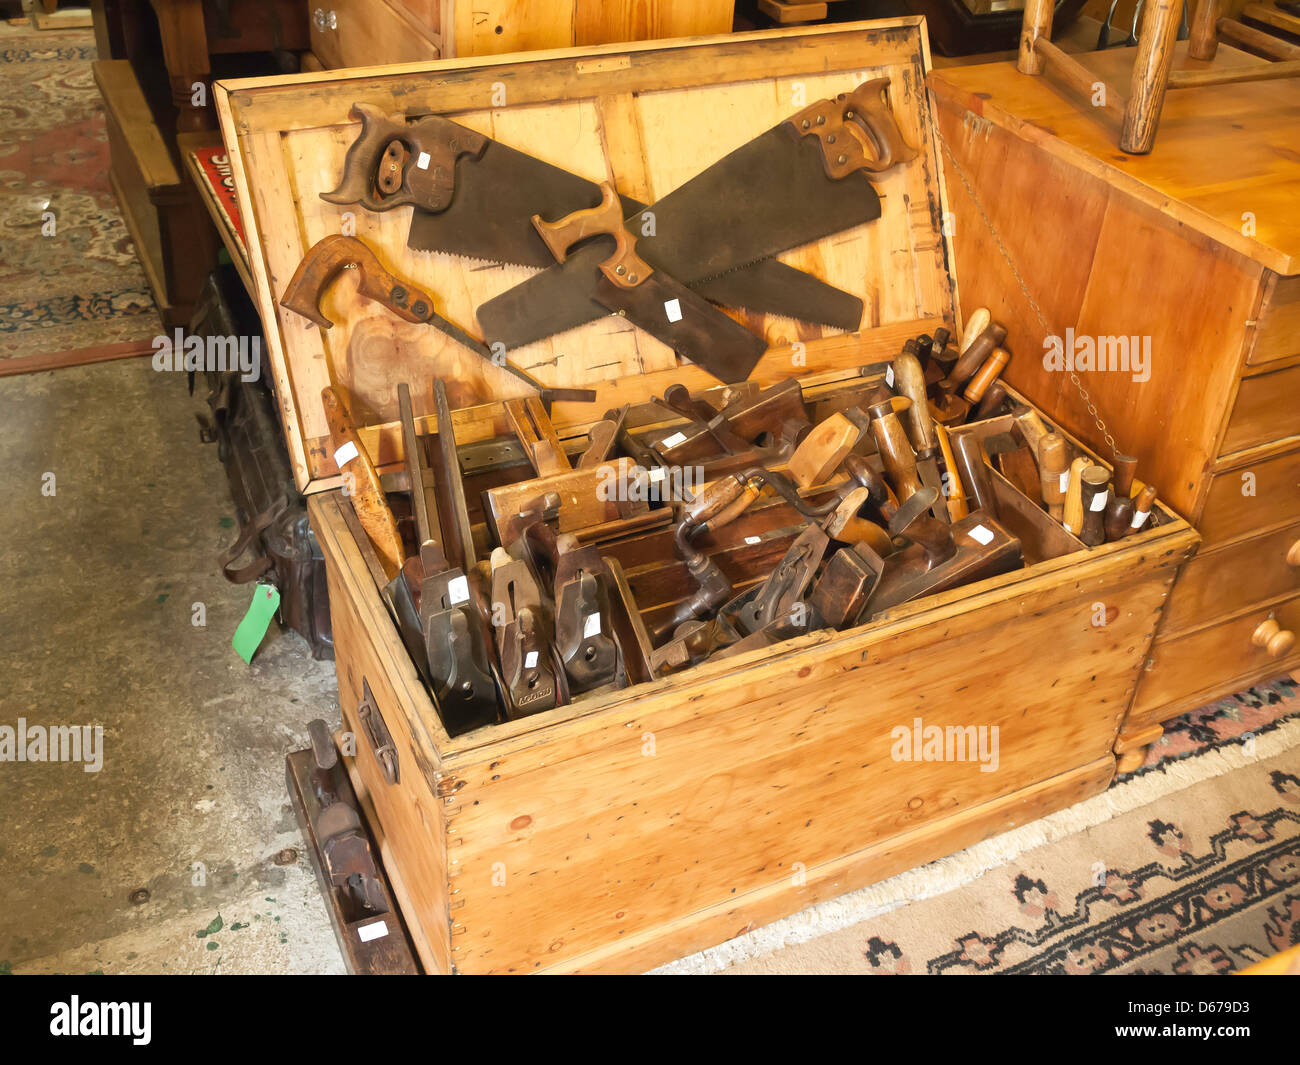 a large box of traditional woodworking tools in a rural